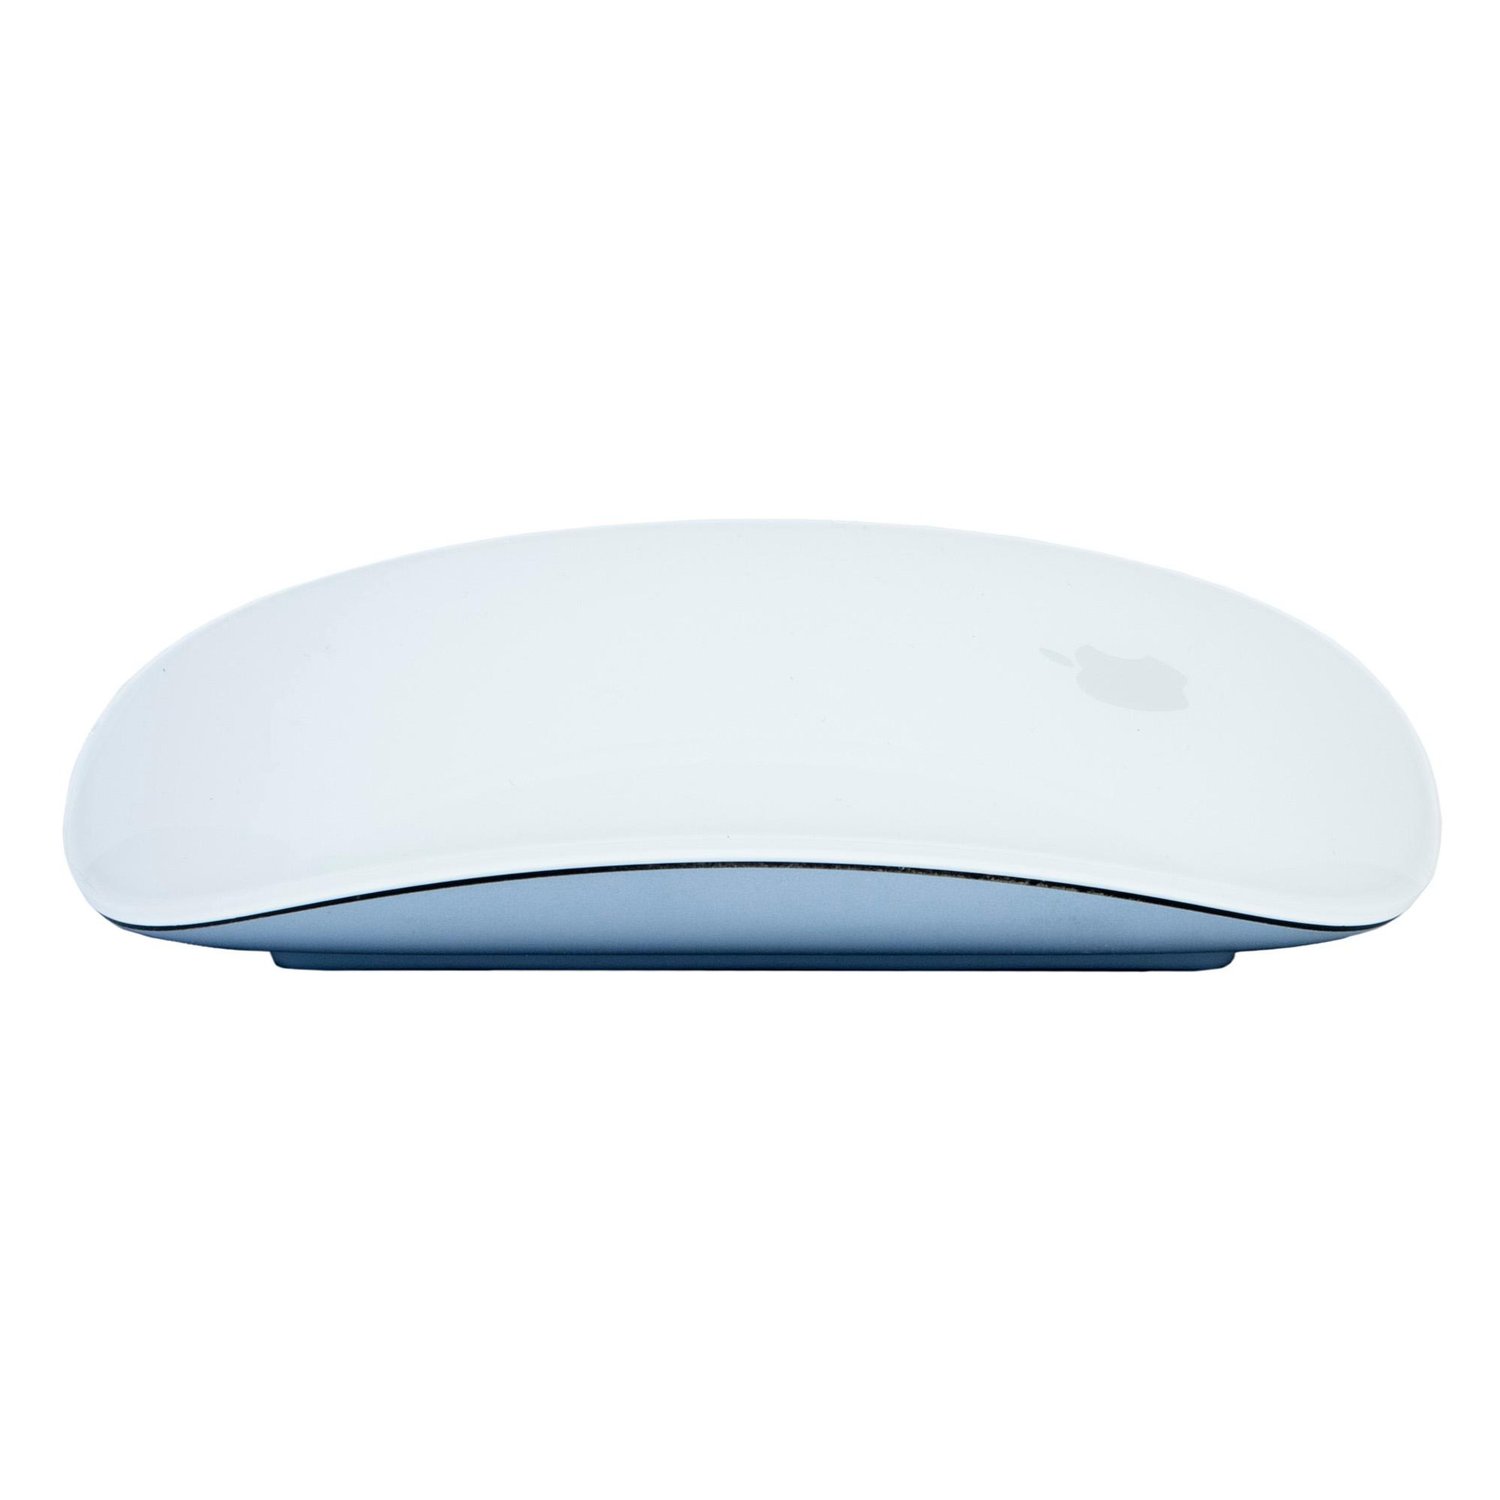 Apple Magic Mouse 2 (Current Model) - Bluetooth Wireless Multi-Touch  Optical Mouse - Blue